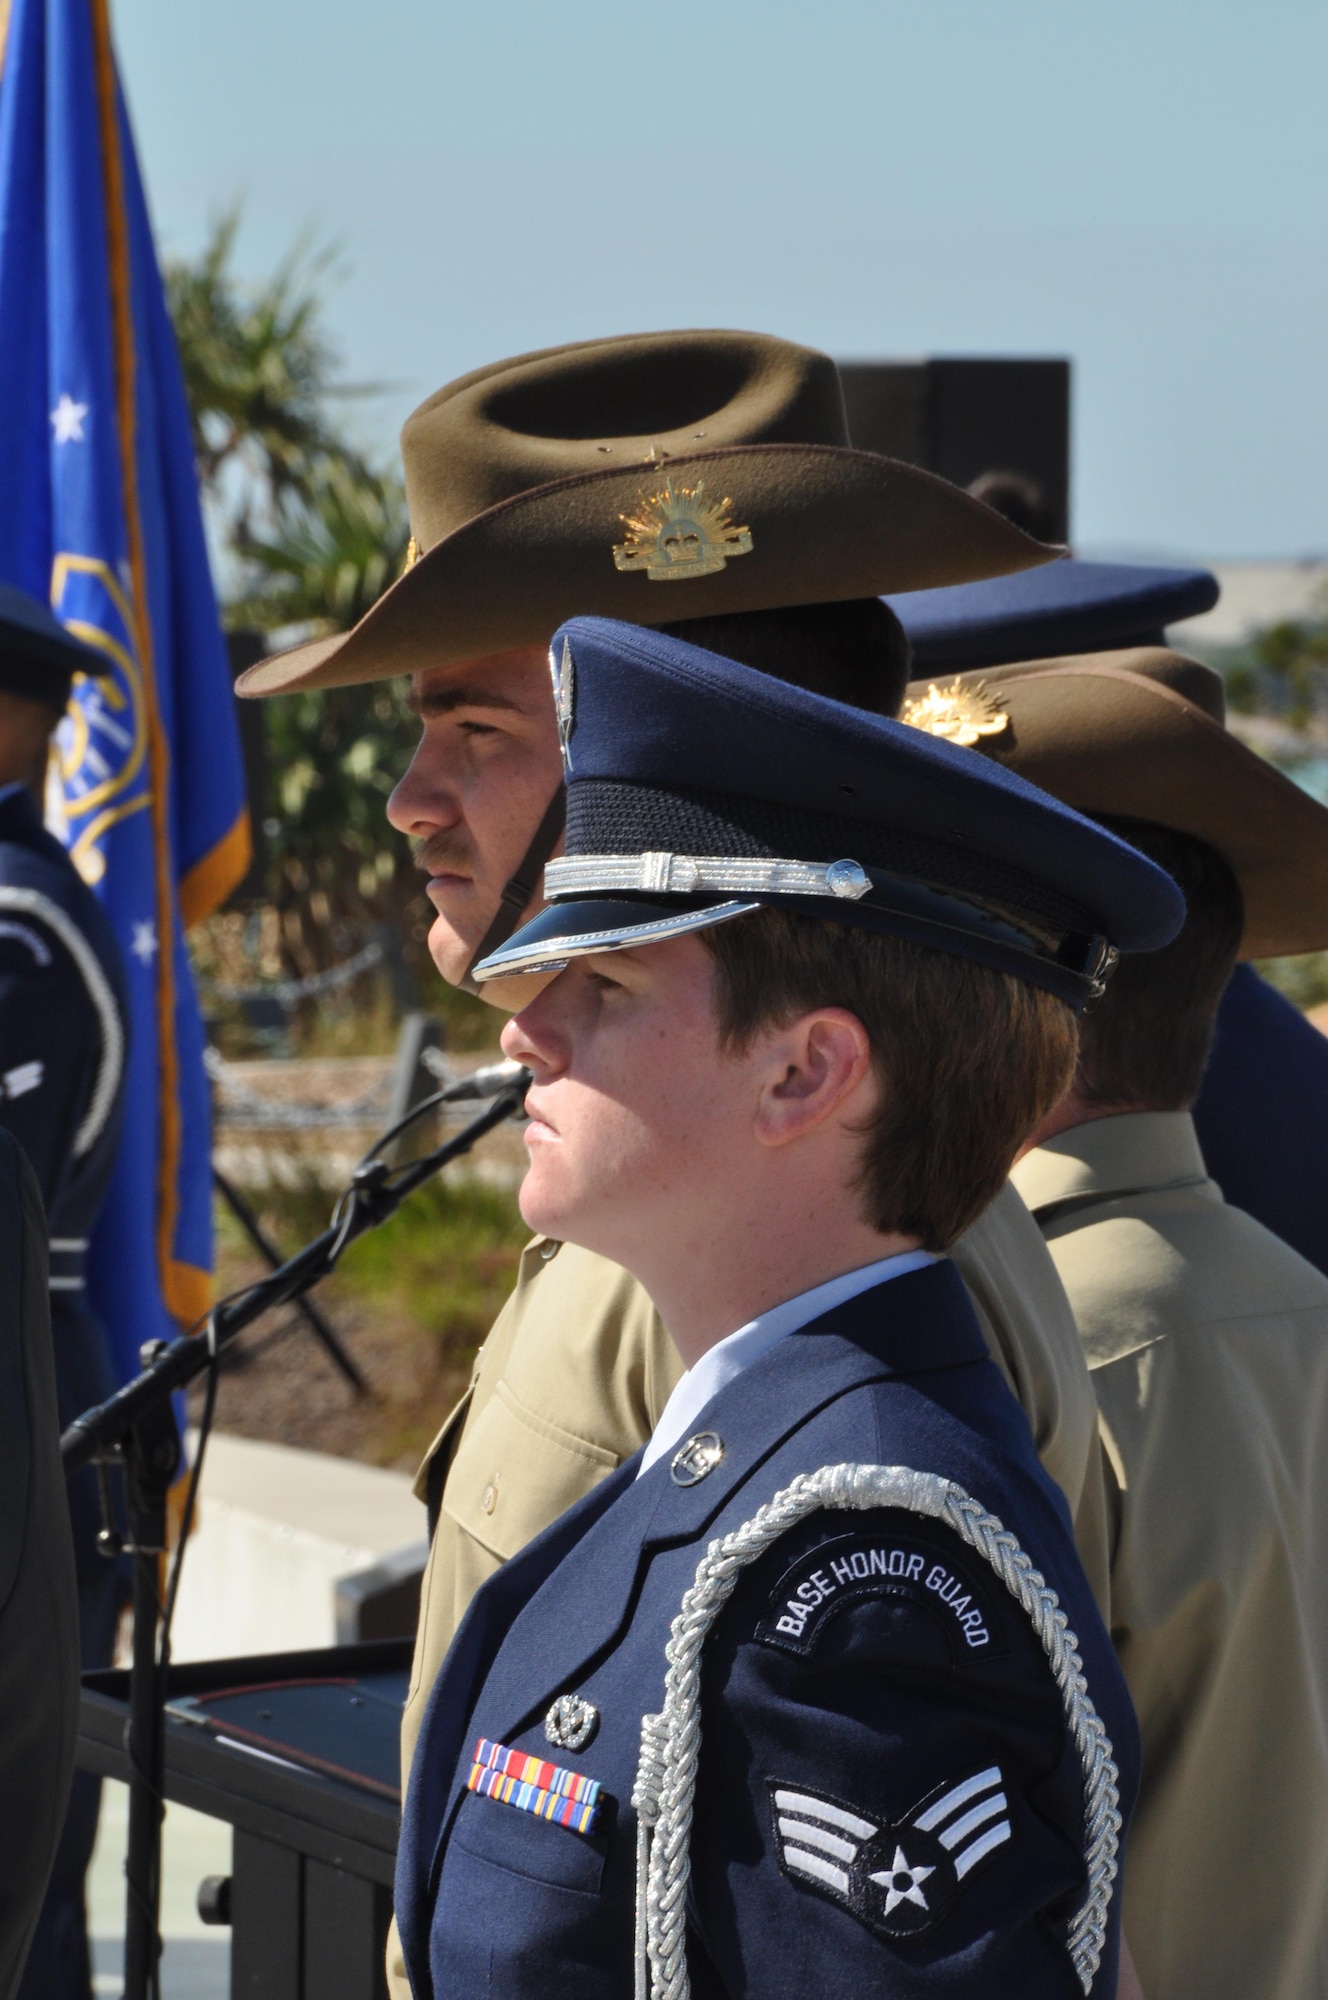 Senior Airman Megan Tubridy, 374th Civil Engineer Squadron and part of the Yokota Air Base Honor Guard, stands beside her Australian counter part during a 5th Air Force Memorial Service at Kissing Point, Townsville, Australia, Aug. 16, 2015. The memorial service honored the men and women who gave their lives and to the many thousands who gave up their youth to serve their country in 5th Air Force during World War II. (U.S. Air Force photo by Capt. George M. Tobias/Released)